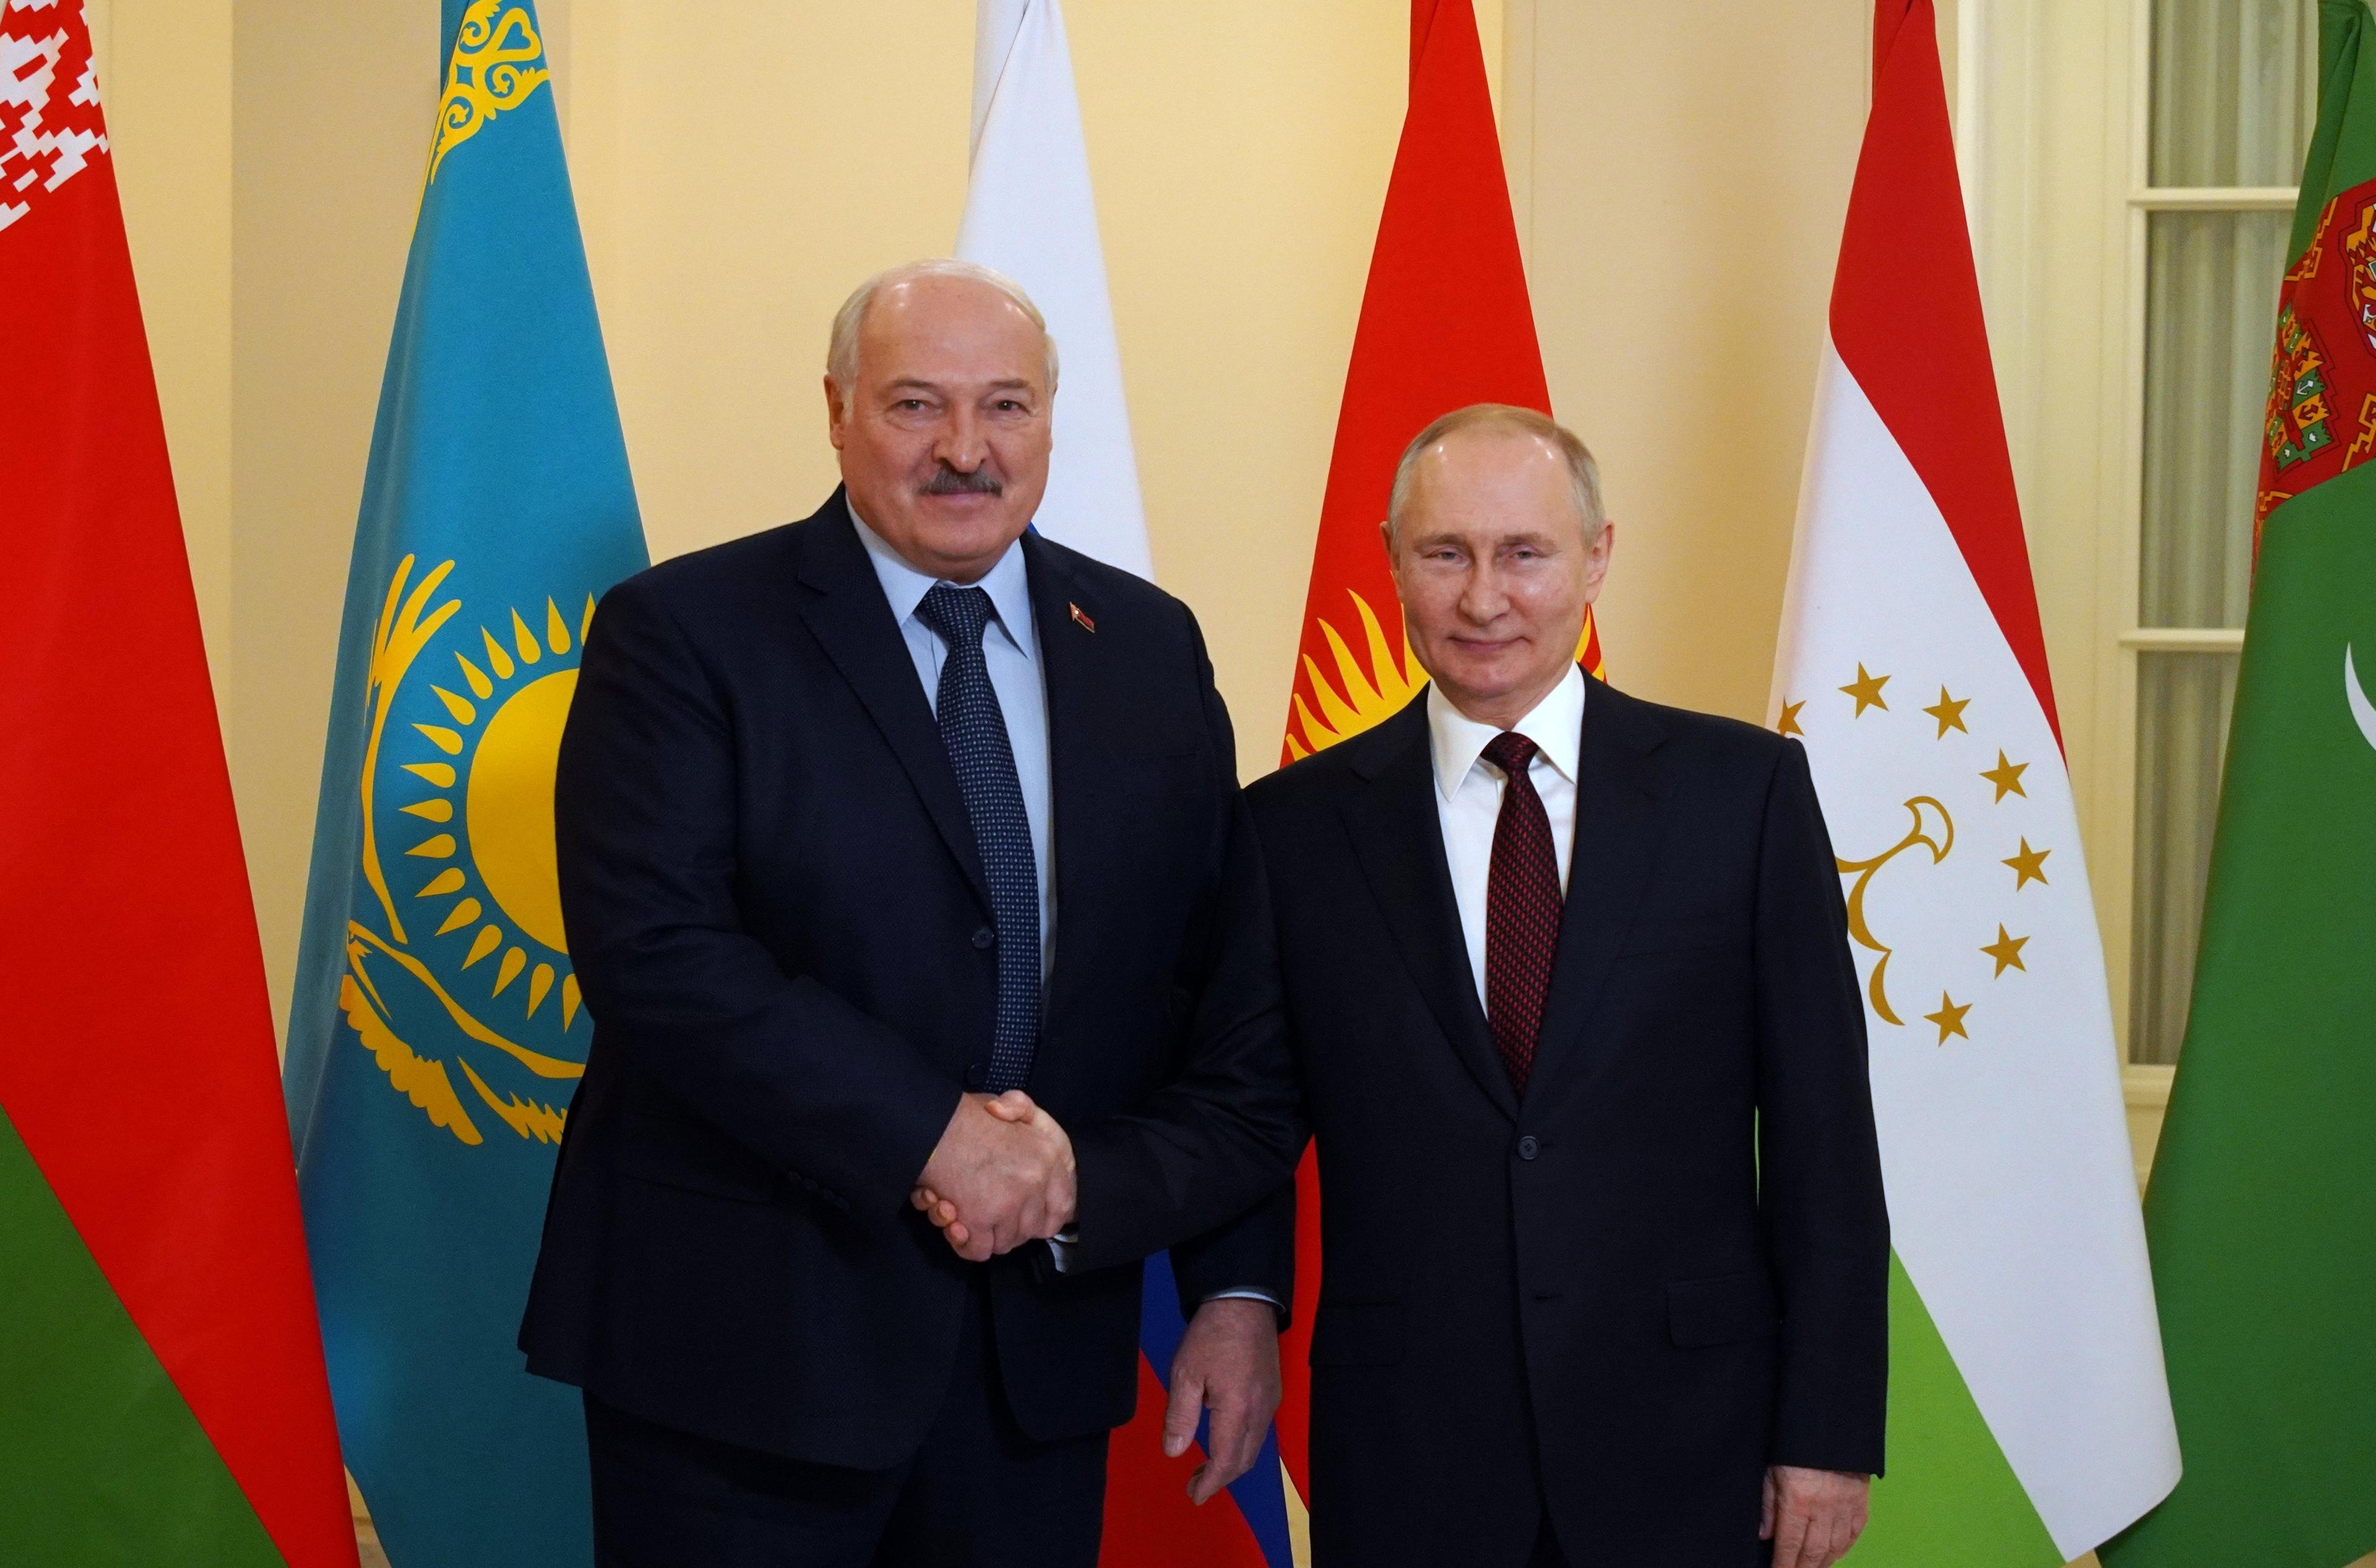 Russian President Vladimir Putin (R) greets Belarus' President Alexander Lukashenko ahead of an informal meeting of the heads of state of the Commonwealth of Independent States (CIS) at the Boris Yeltsin Presidential Library in Saint Petersburg on December 26, 2022. (Photo by Alexey DANICHEV / SPUTNIK / AFP)